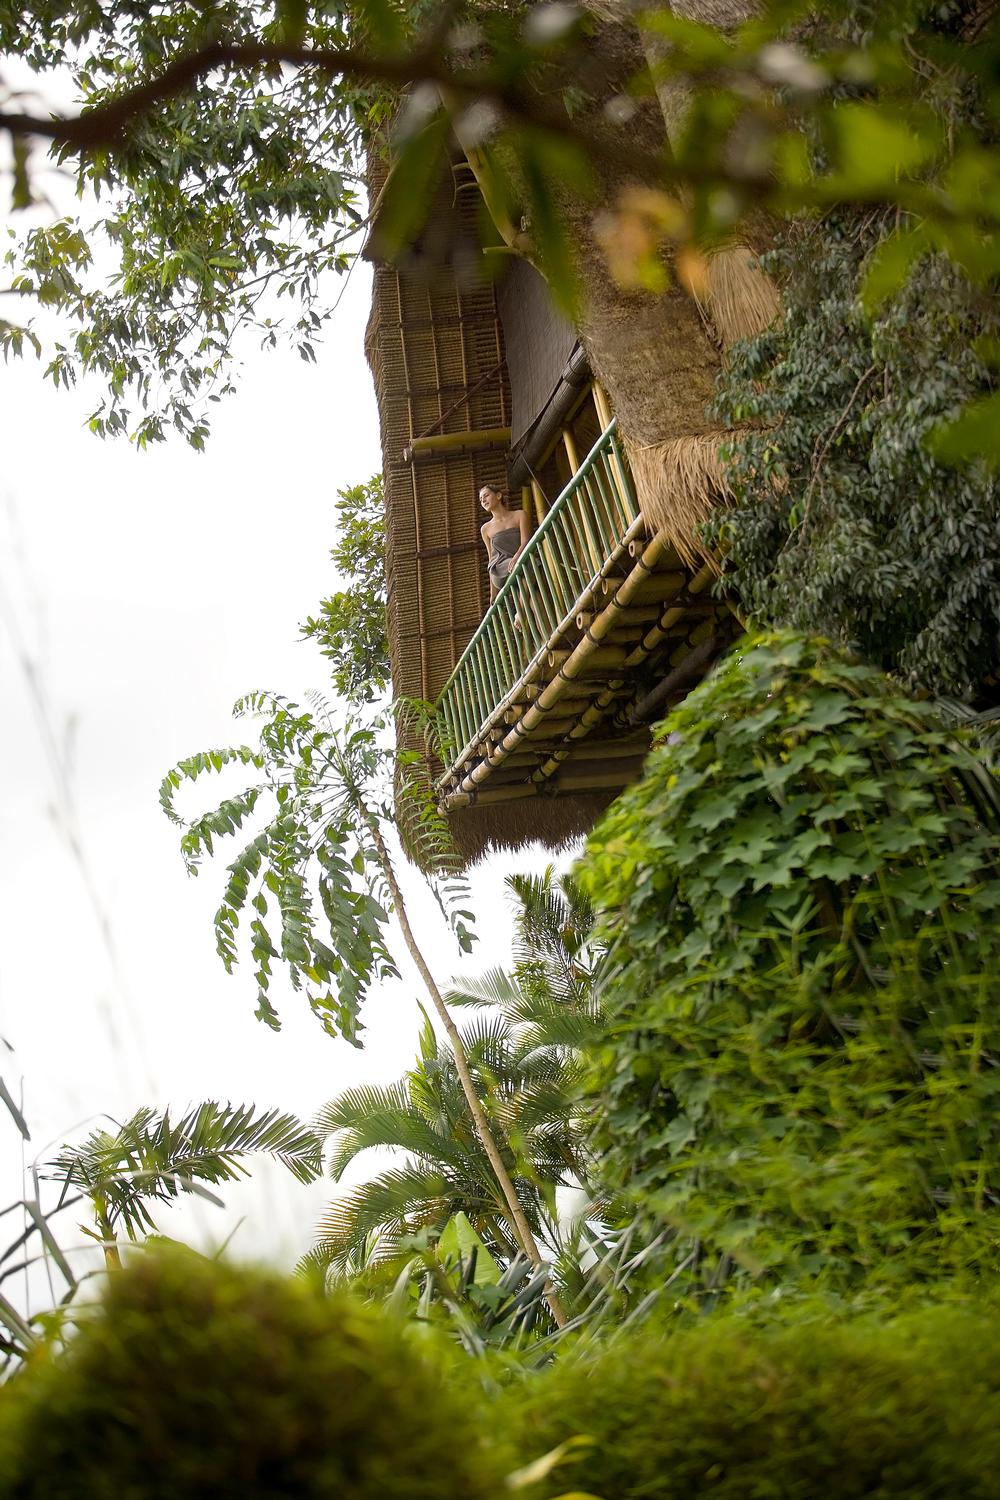 The first L’Occitane hotel spa, with treetop treatment rooms, opened at Kupu Kupu Barong resort in Bali in 2009